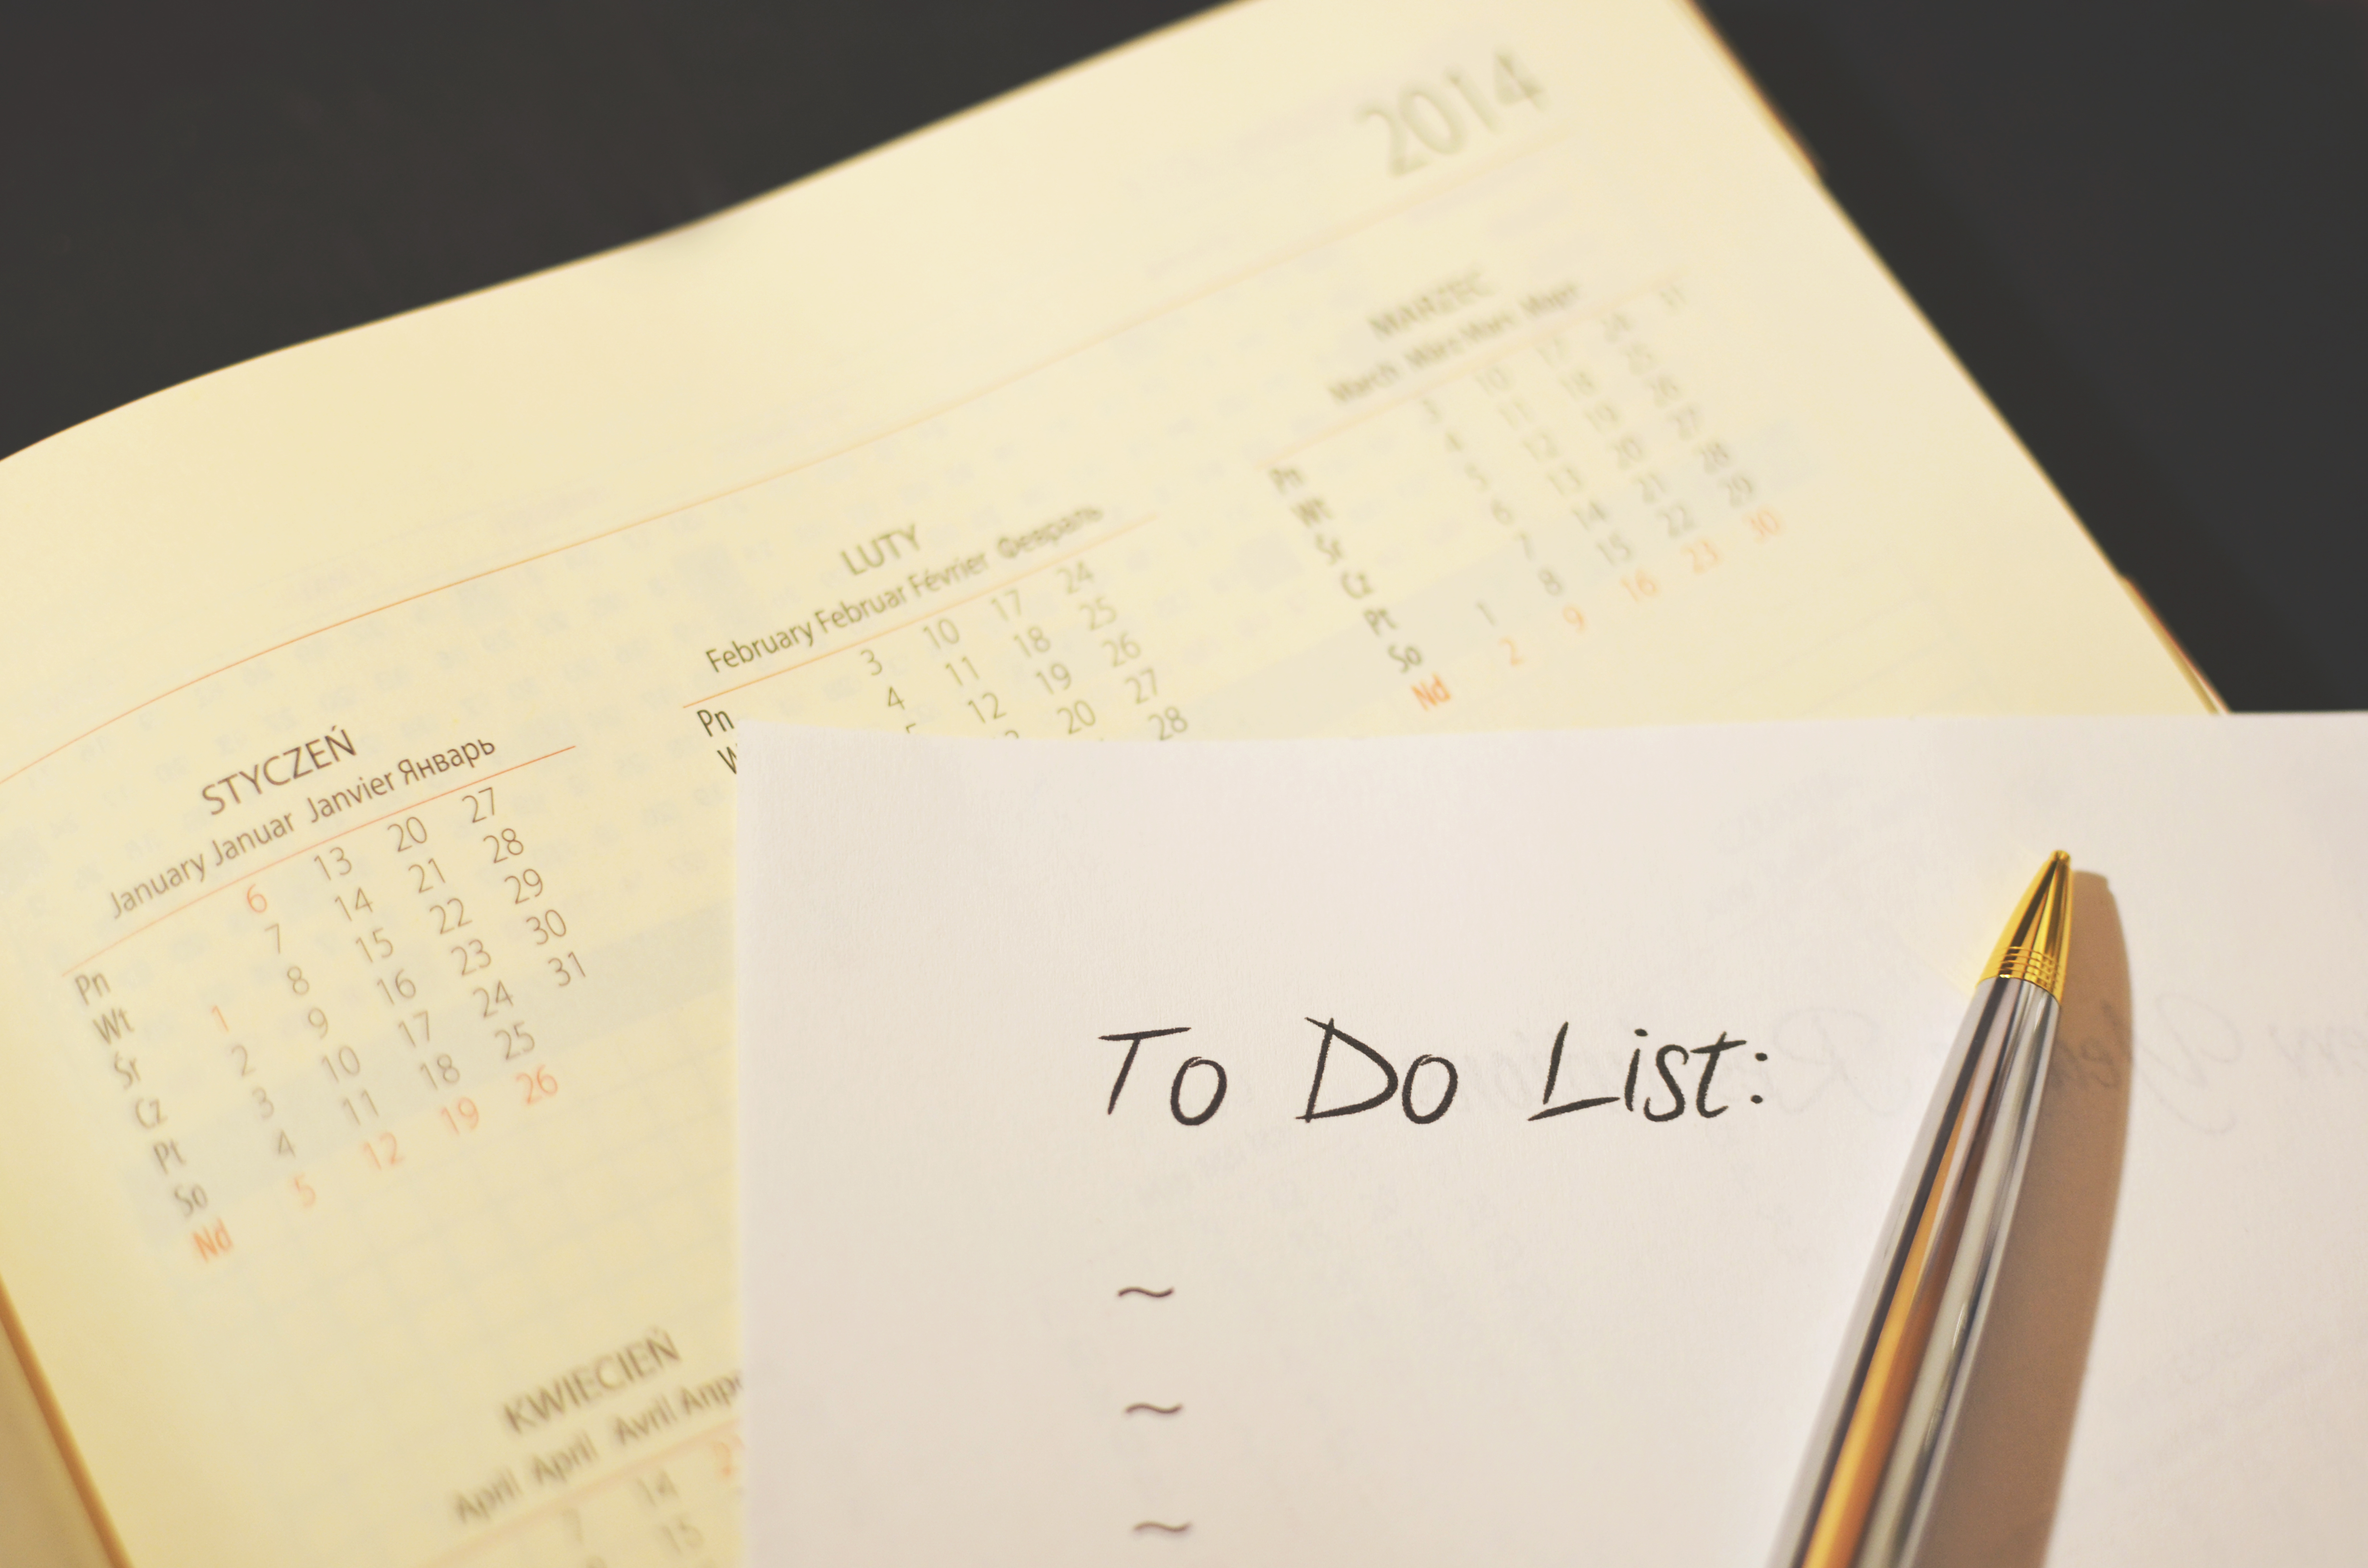 Self Employed? Year End To-Do’s